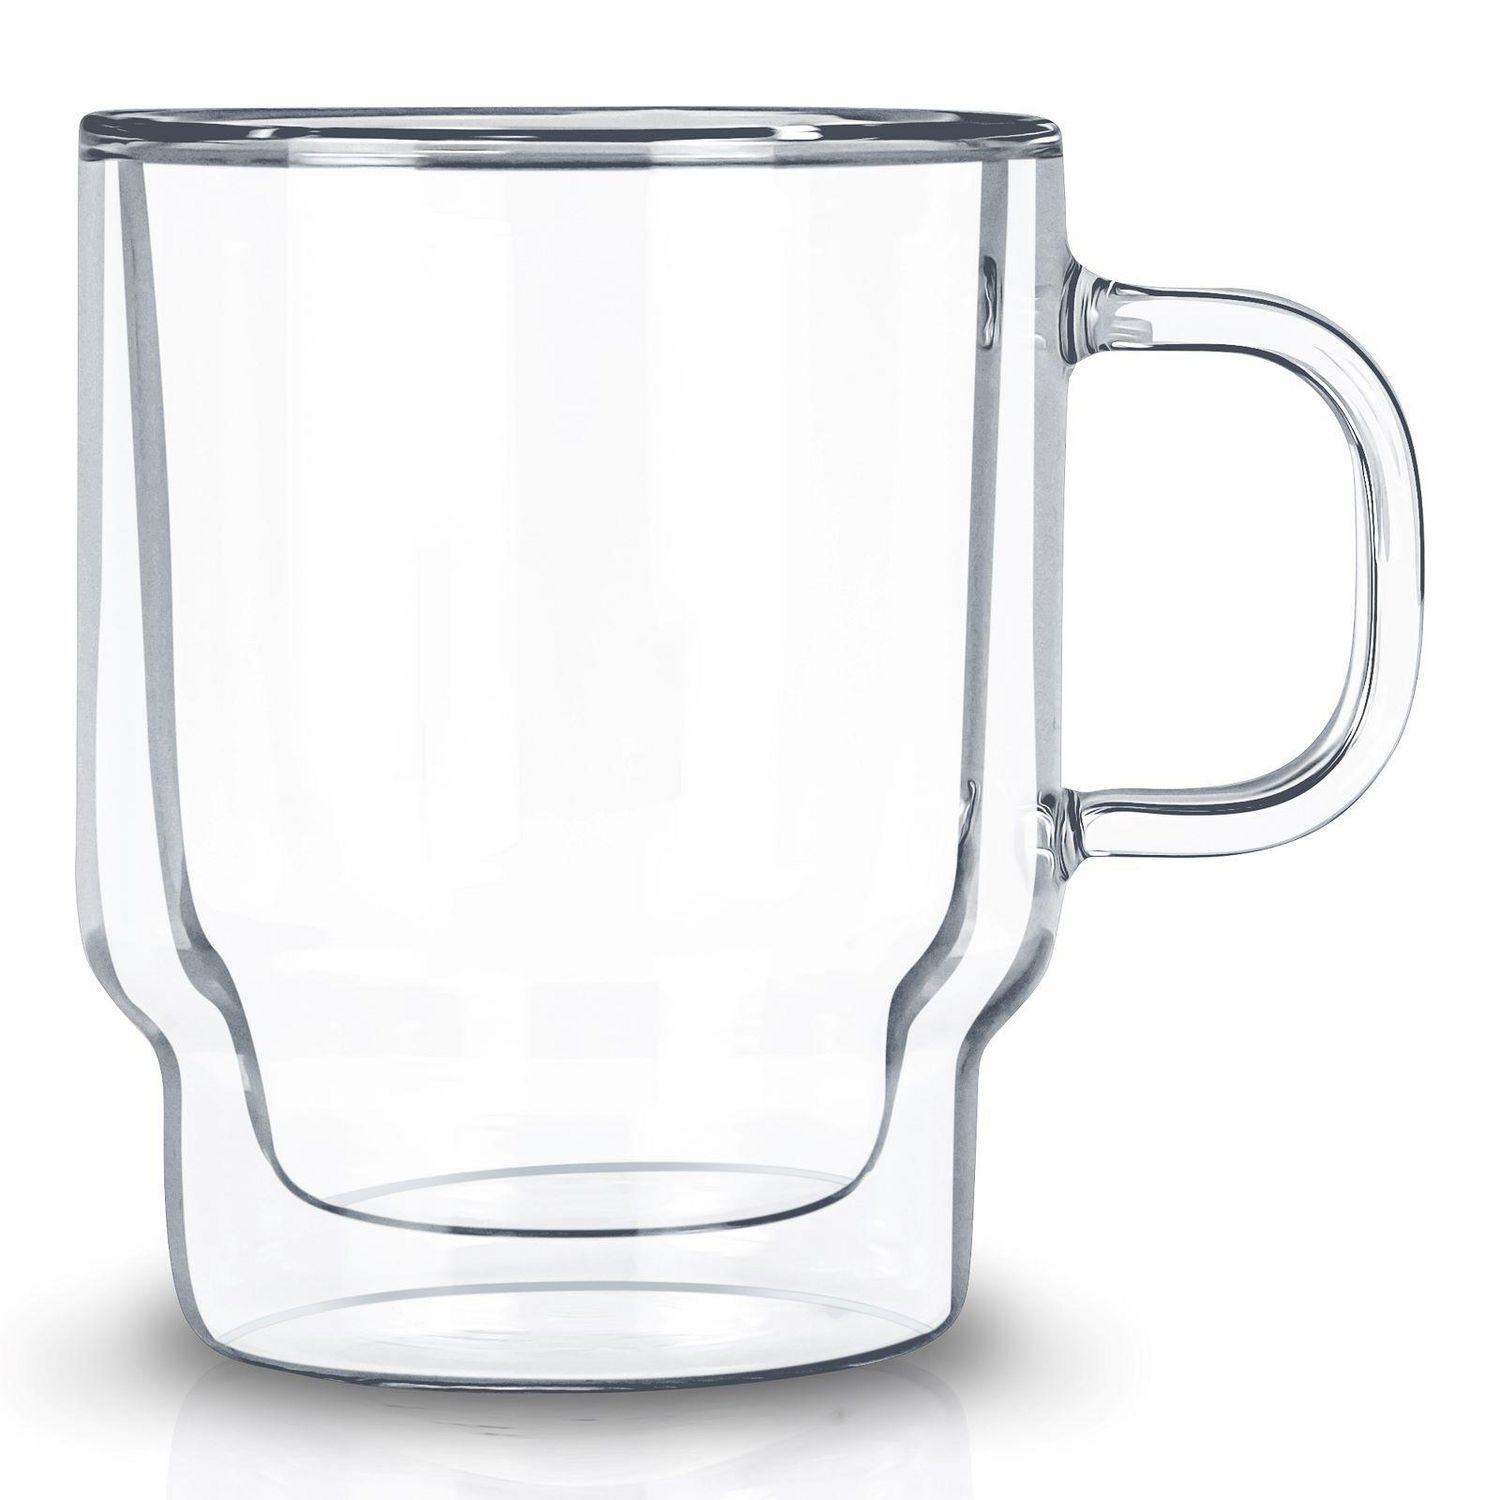 Double Wall Empilable Stackable Mug 450ml (Set of 4) Brilliant